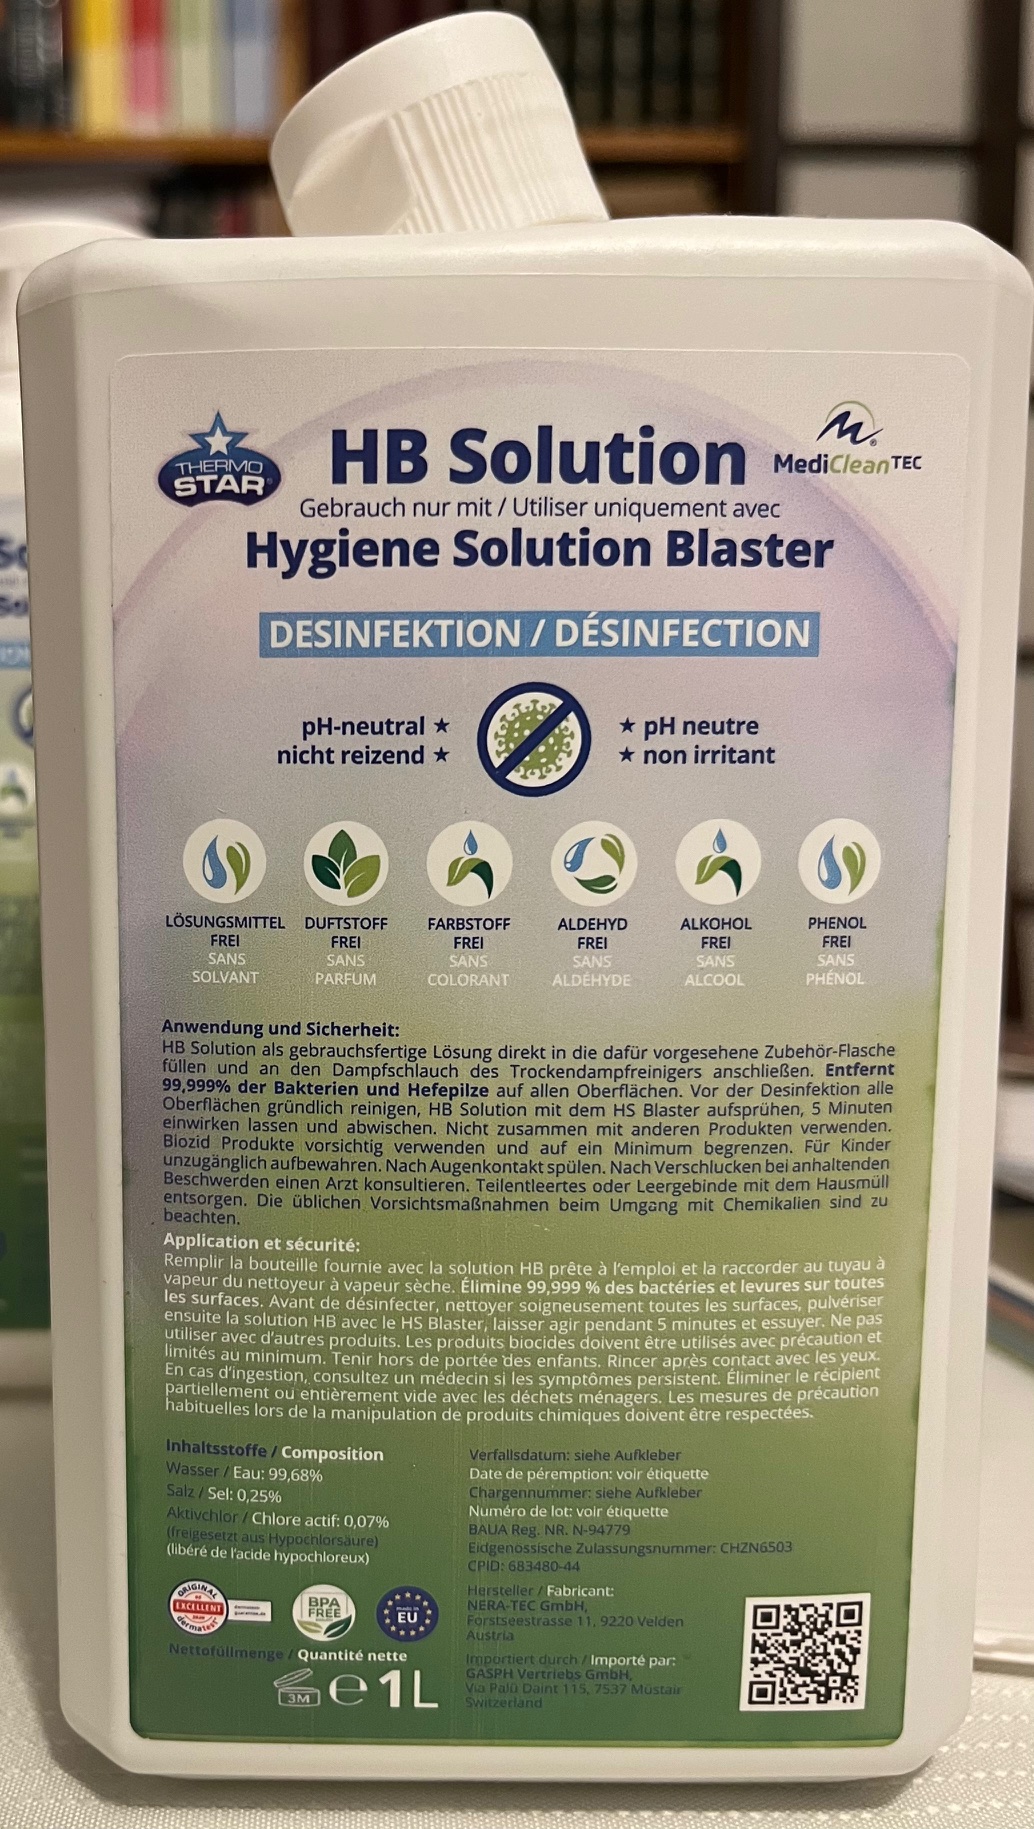 INTERNATIONAL PATENT – “Innovative disinfectant HB Solution”